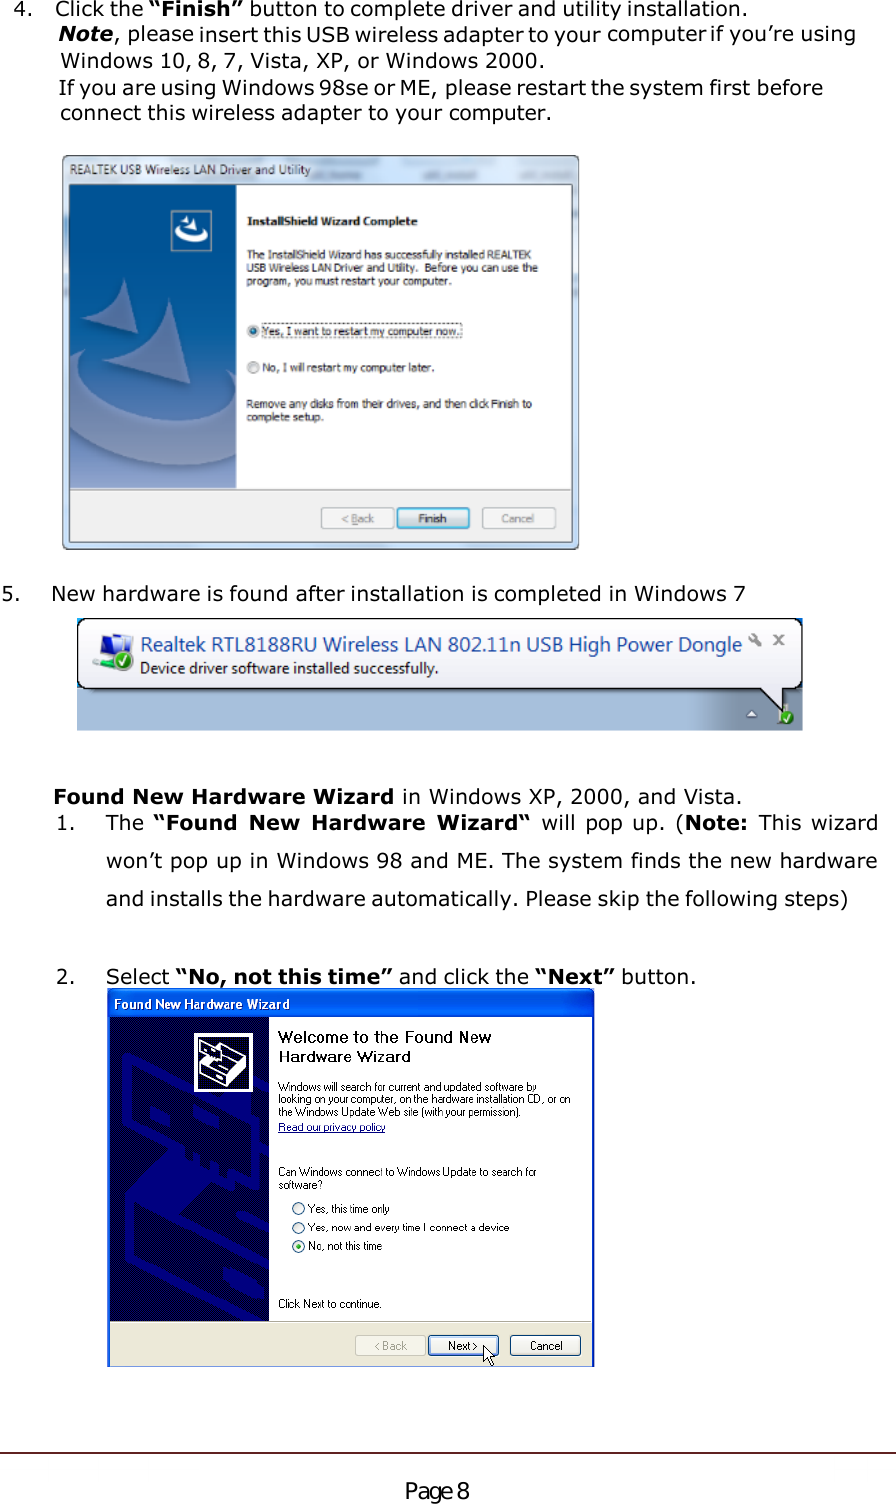 4.Click the “Finish” button to complete driver and utility installation.Note, please insert this USB wireless adapter to your computer if you’re usingWindows 10, 8, 7, Vista, XP, or Windows 2000.If you are using Windows 98se or ME, please restart the system first beforeconnect this wireless adapter to your computer.5.New hardware is found after installation is completed in Windows 7Found New Hardware Wizard in Windows XP, 2000, and Vista.1.The “Found  New  Hardware Wizard“ will pop up. (Note: This wizardwon’t pop up in Windows 98 and ME. The system finds the new hardwareand installs the hardware automatically. Please skip the following steps)2.Select “No, not this time” and click the “Next” button.Page 8